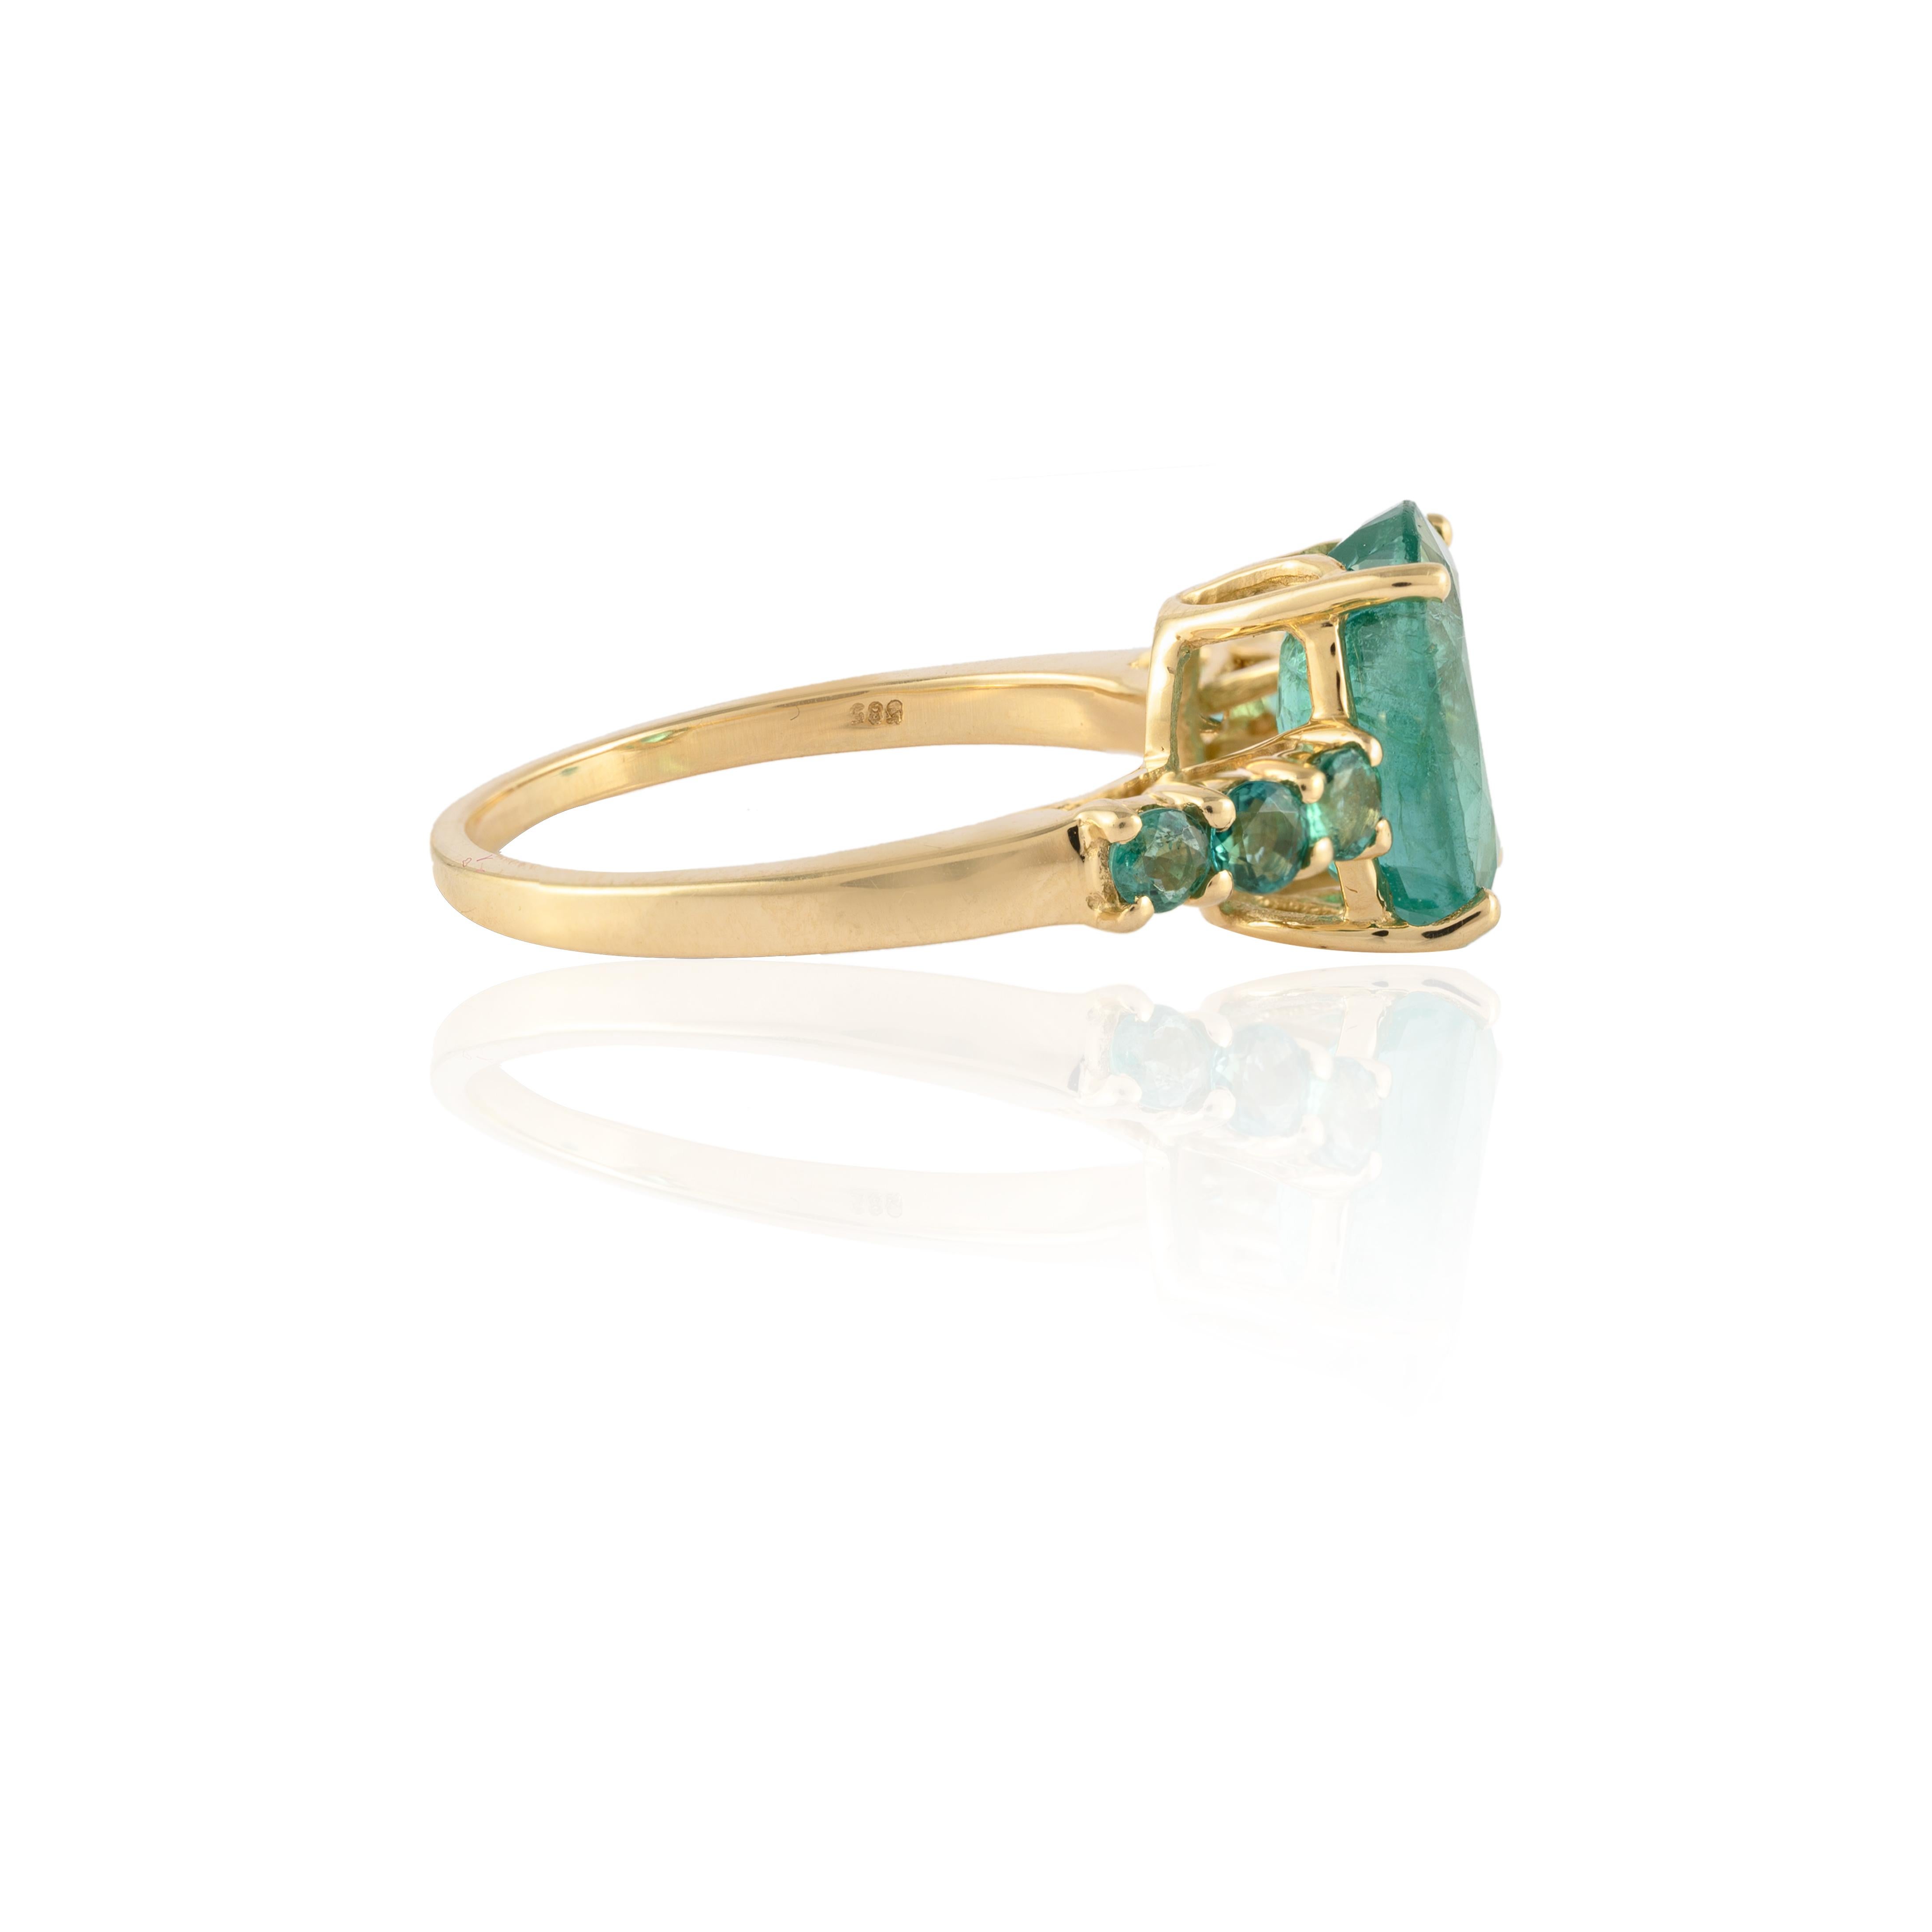 For Sale:  3.09 Carat Genuine Emerald Ring Handcrafted in 14k Solid Yellow Gold 3